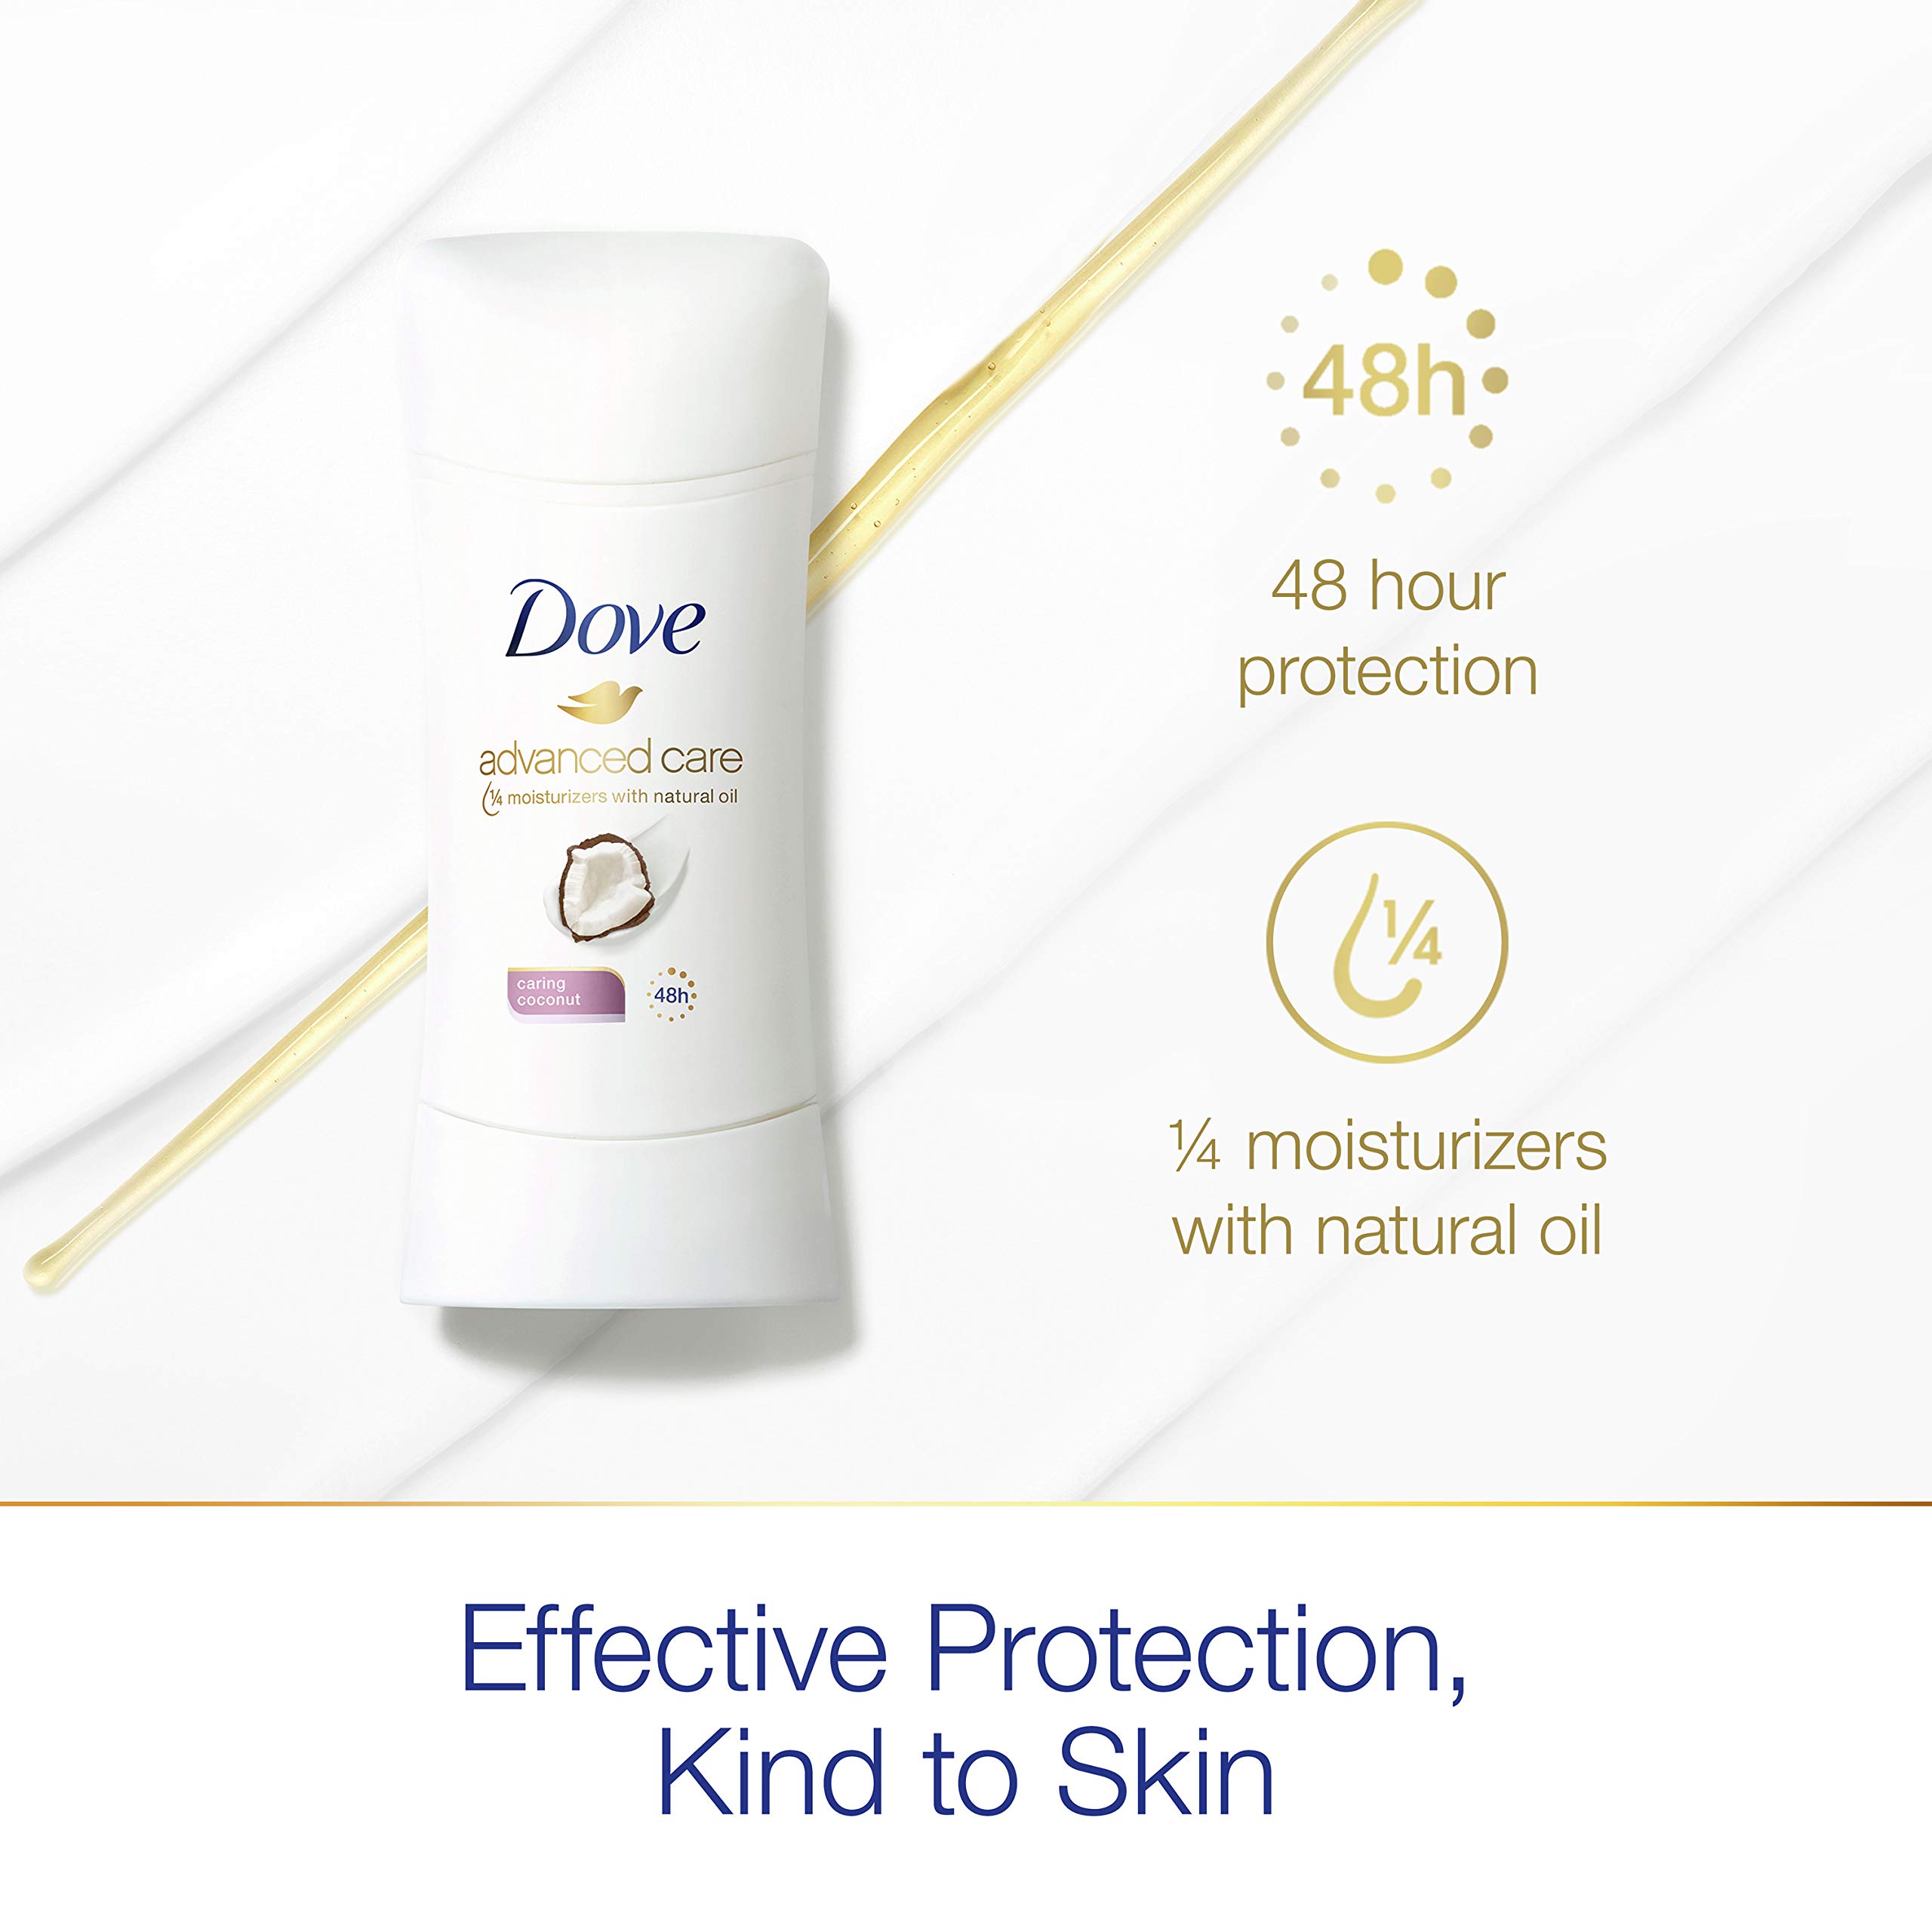 Dove Antiperspirant Deodorant with 48 Hour Protection Caring Coconut Deodorant for Women, 2.6 Ounce (Pack of 4)